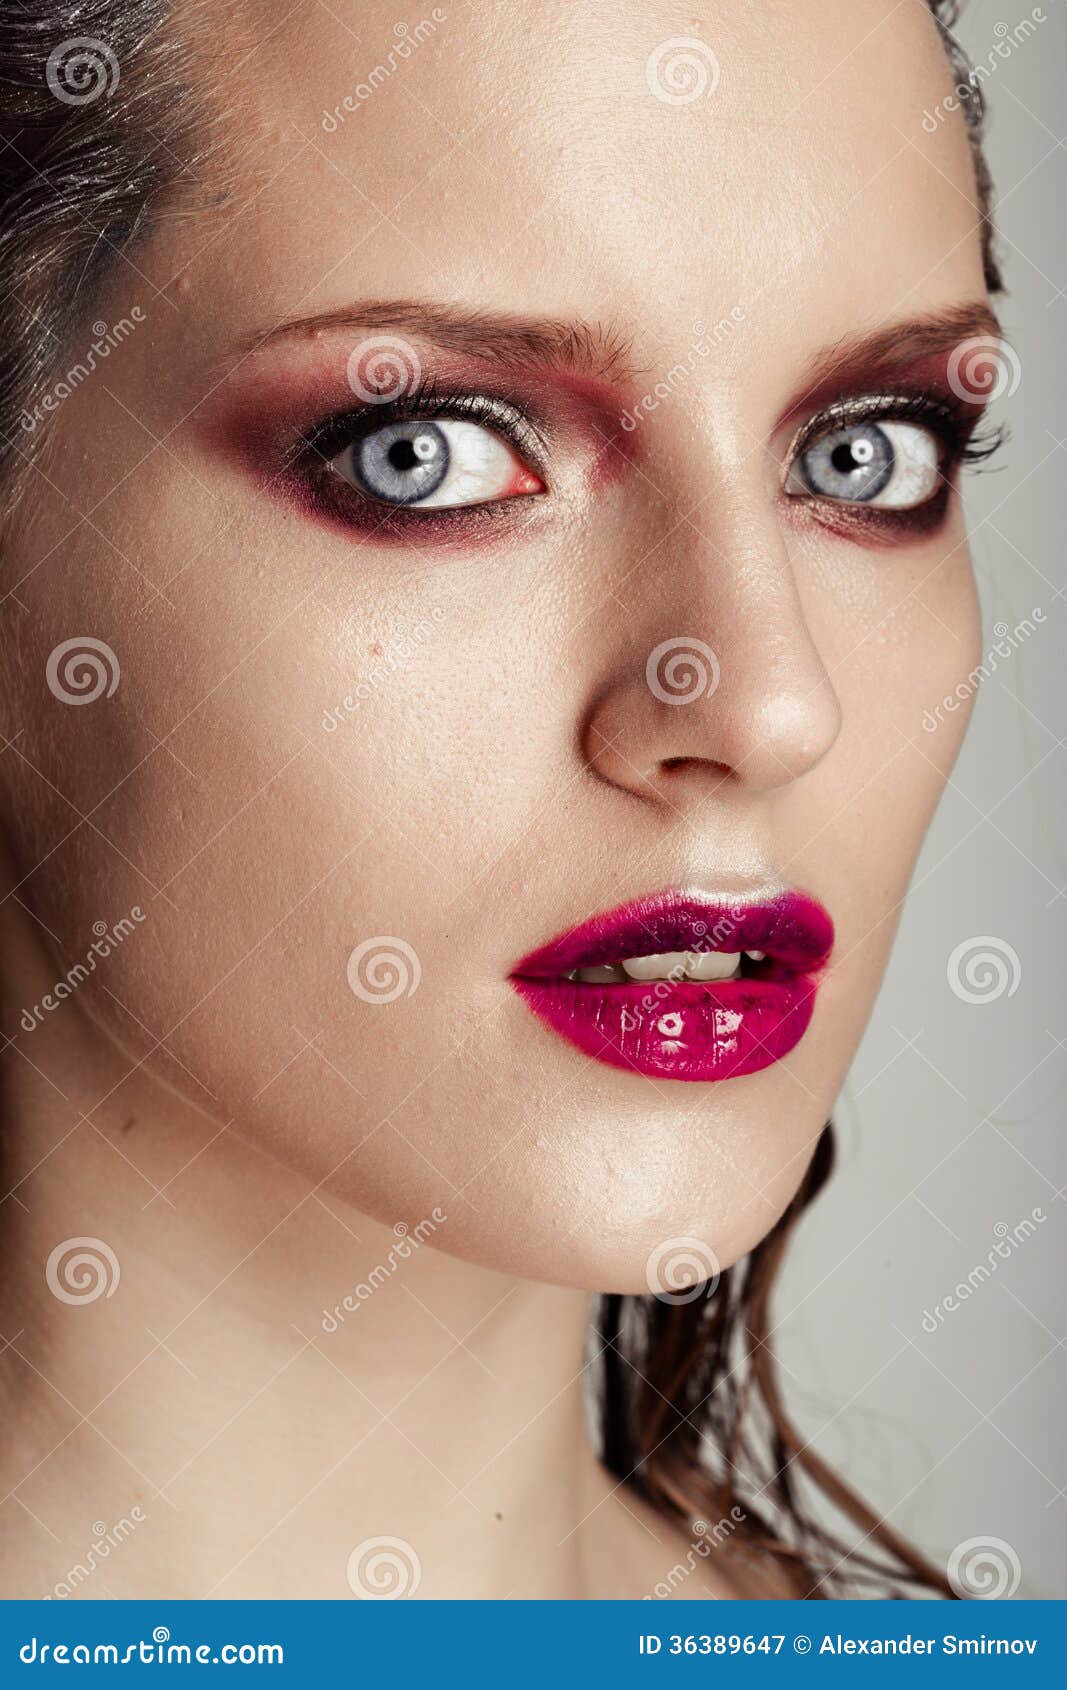 Hot Young Woman Model With Bright Red Lips Makeup Stock 